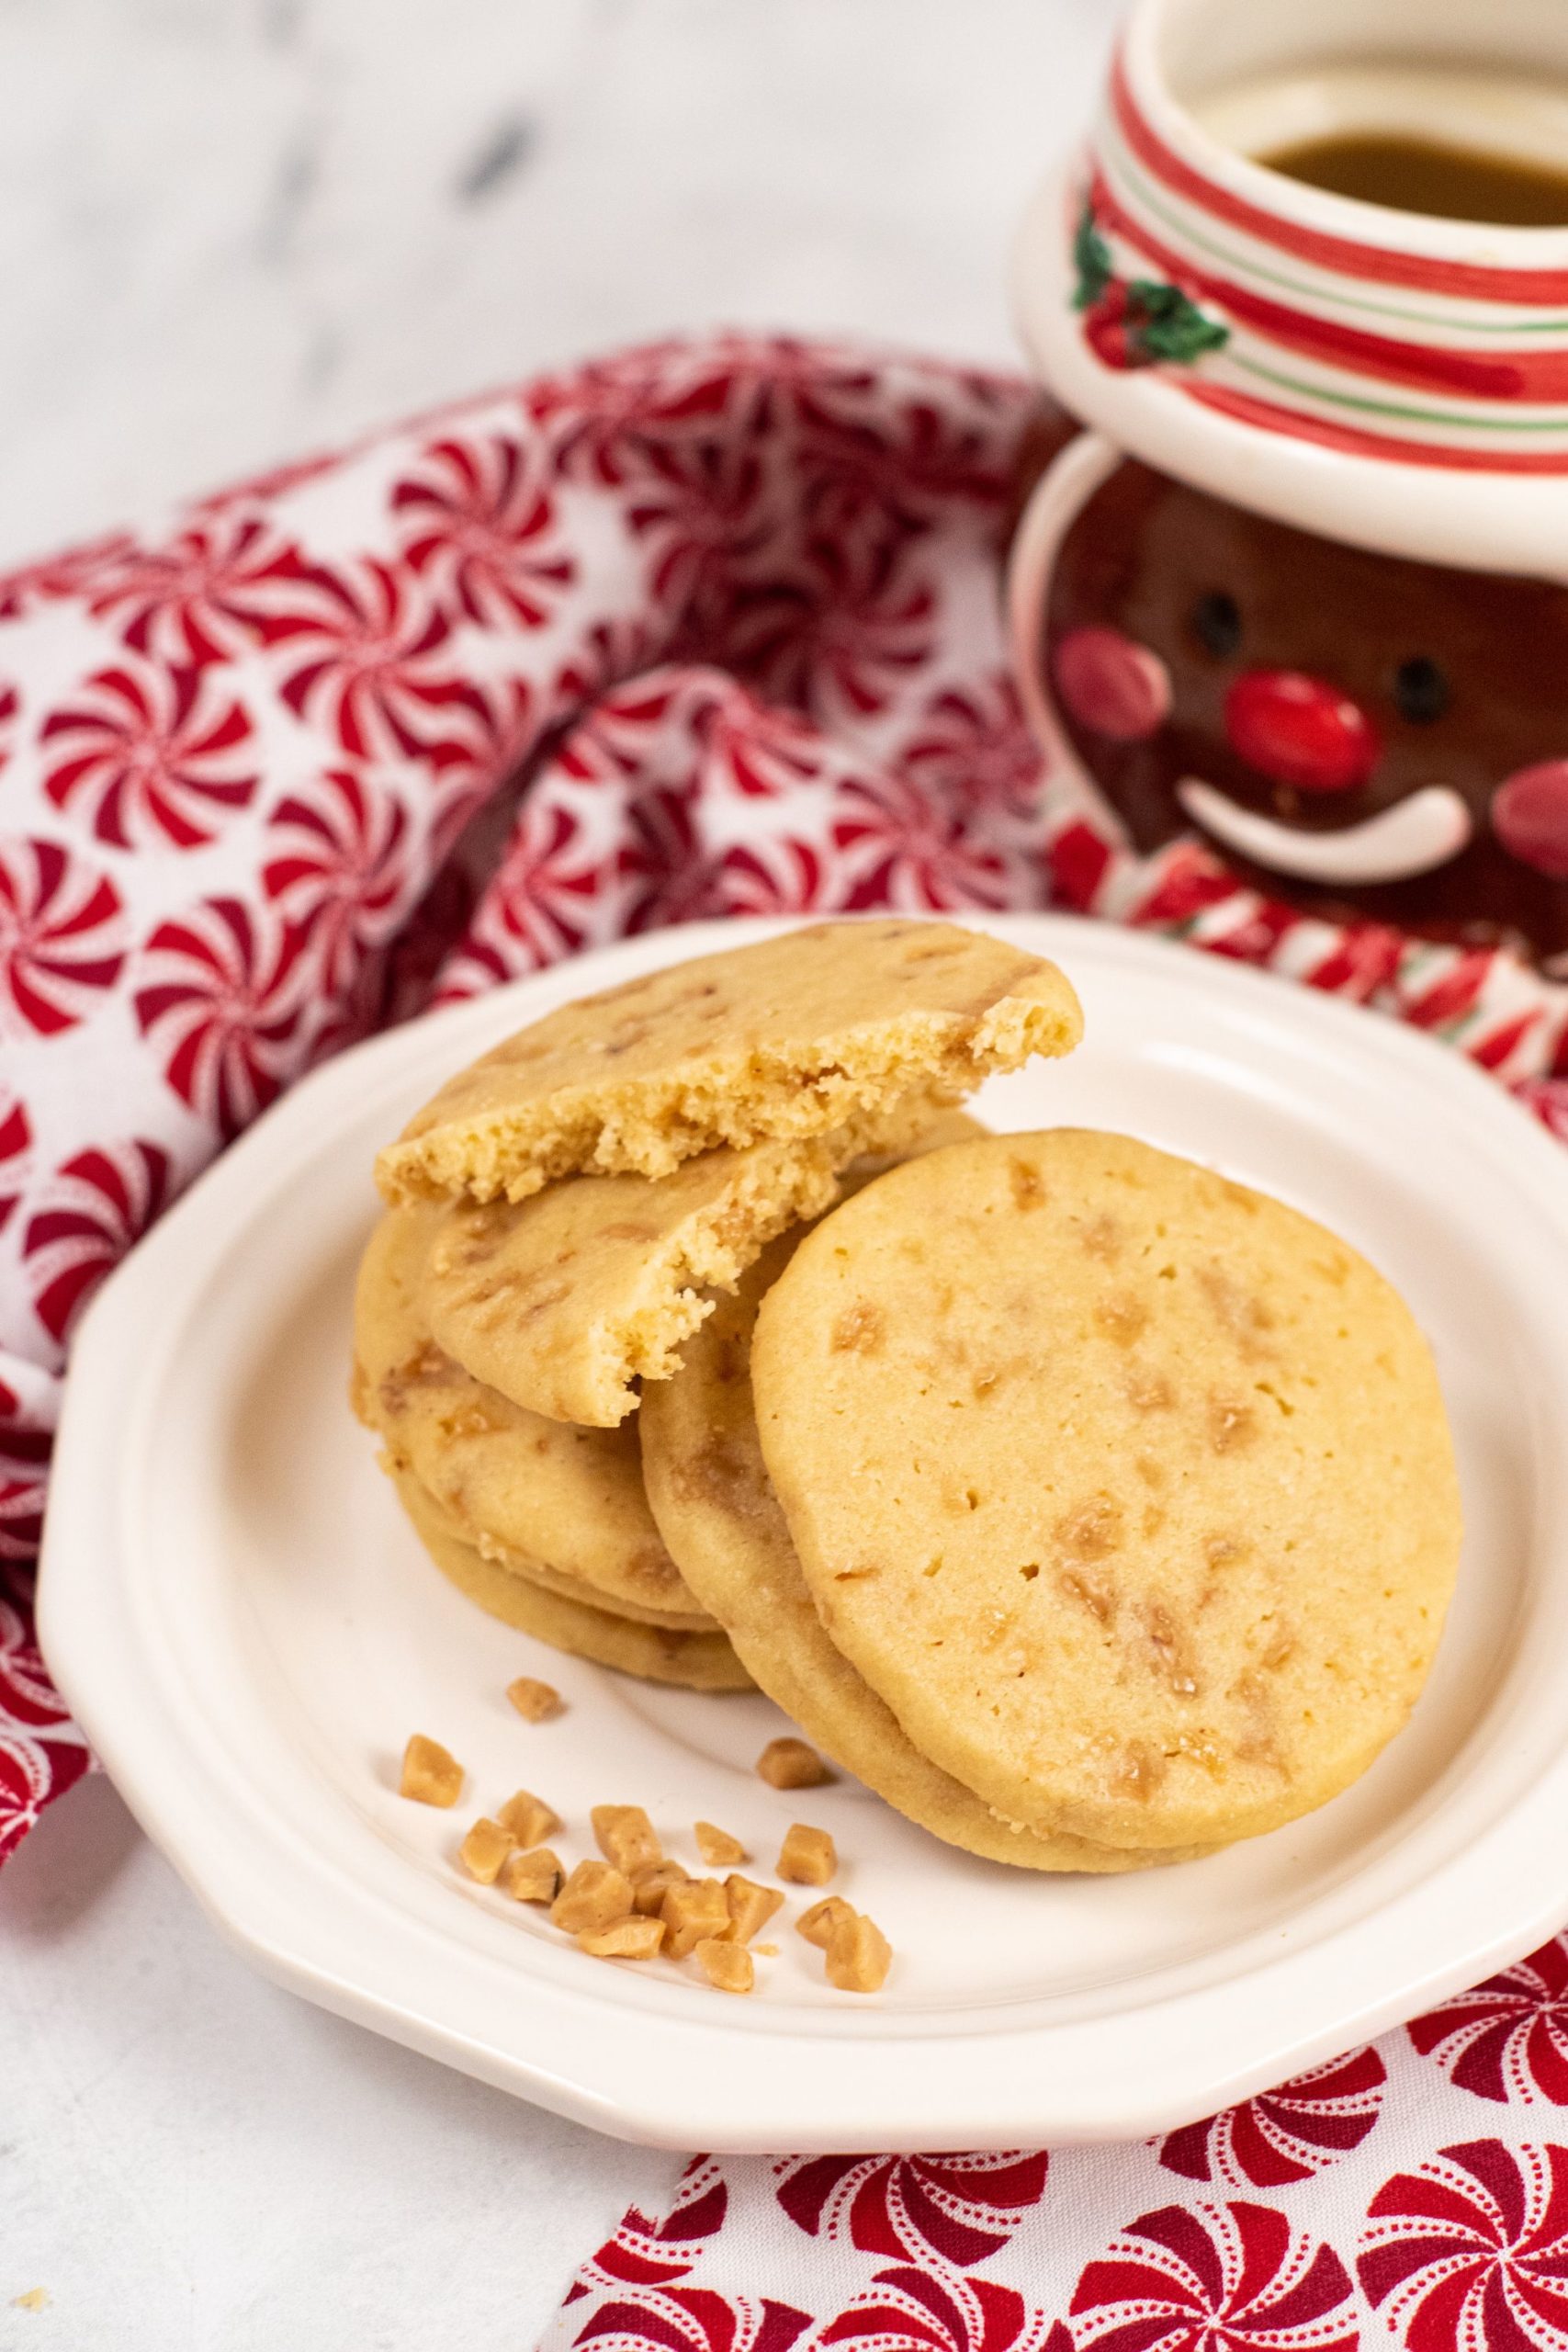 Toffee cookies in a pile on a white plate with a gingerbread mug in the background